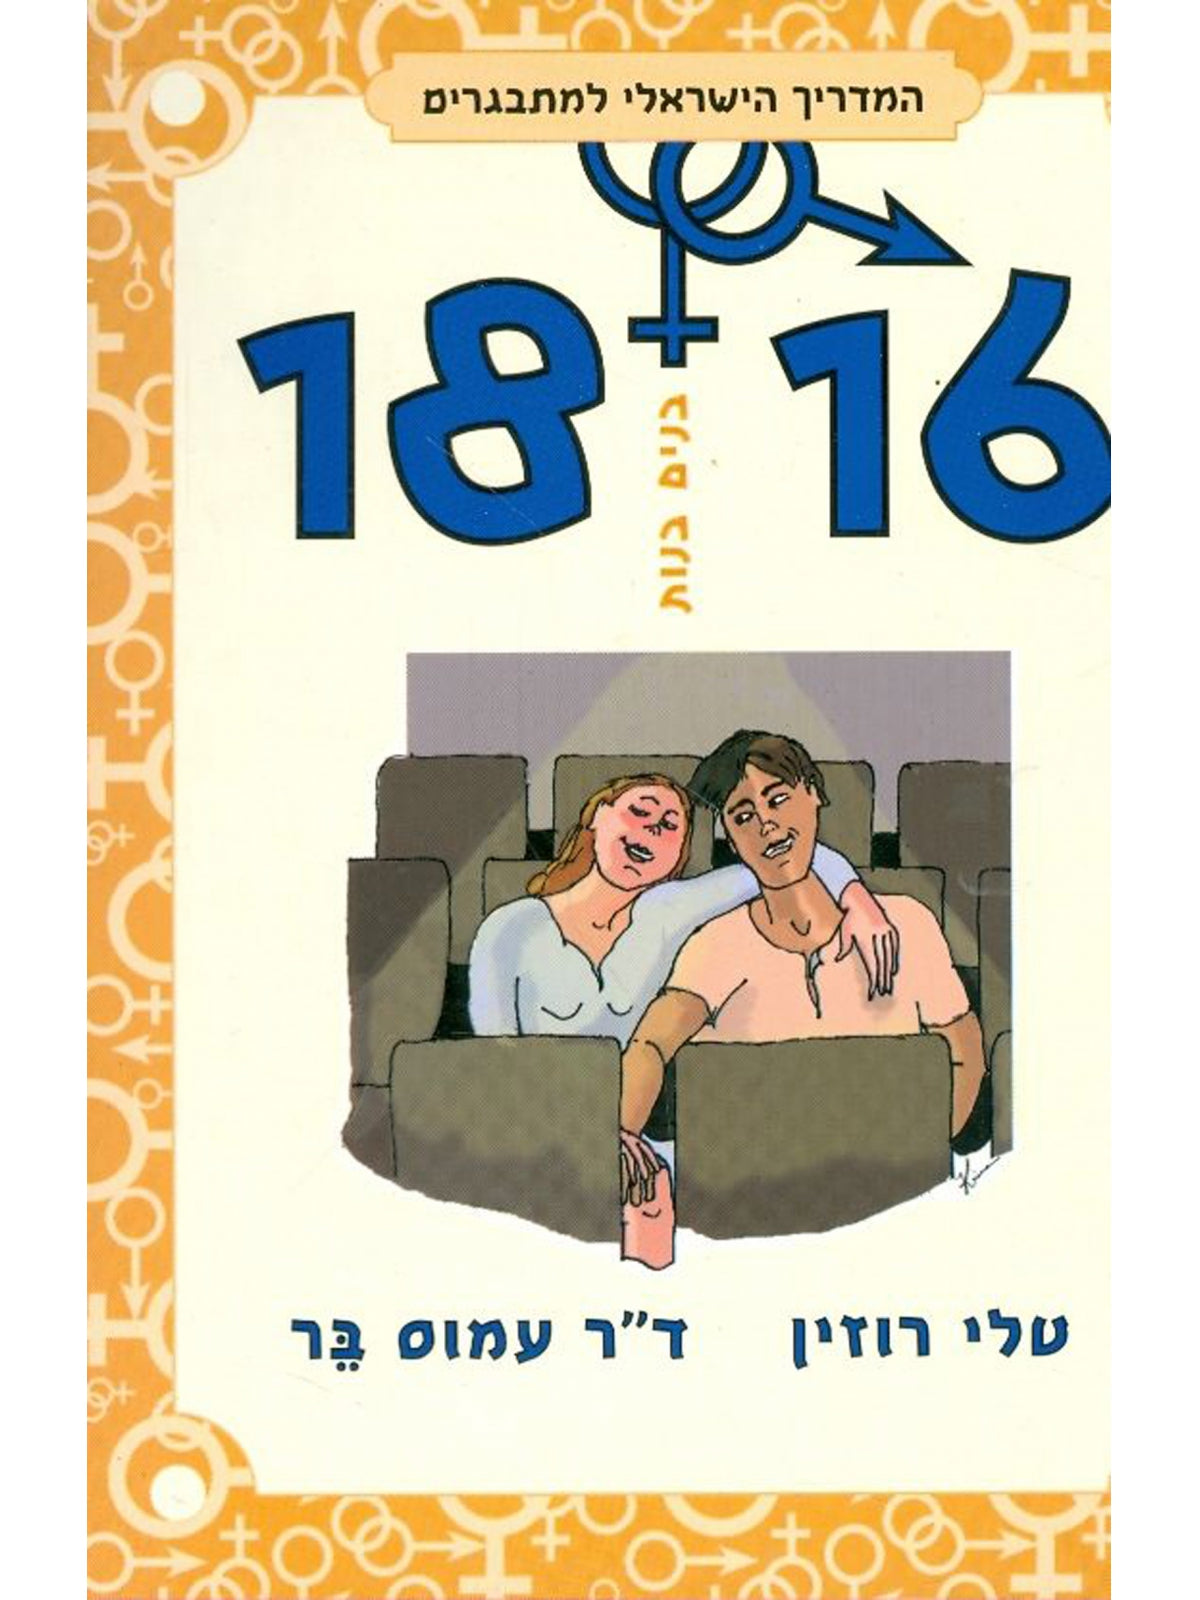 BOYS AGED 16-18 THE ISRAELI GUIDE FOR TEENAGERS